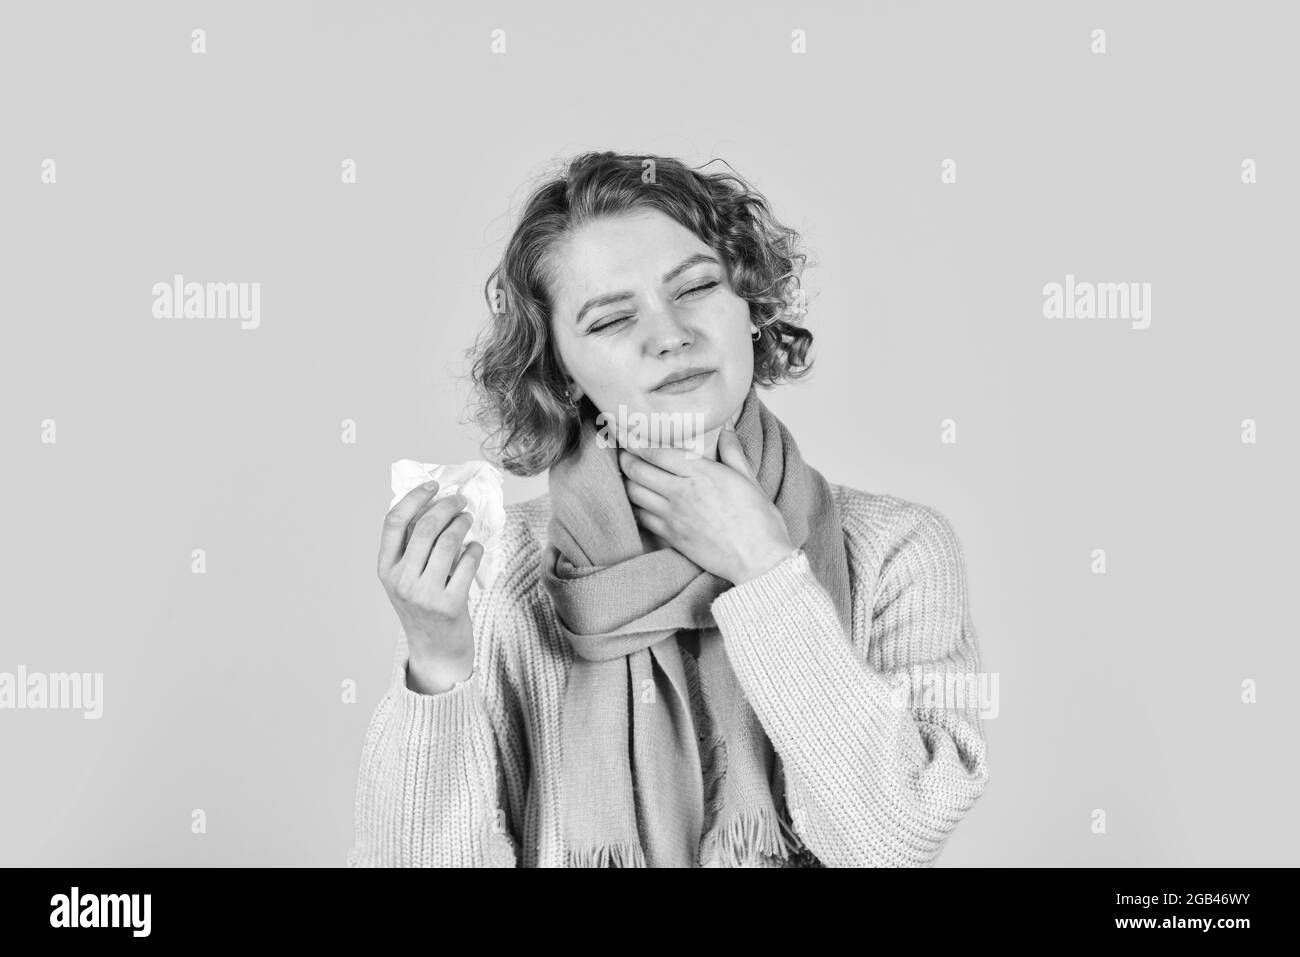 feel so sick. concept of treating allergies or colds. runny nose. woman with allergy blowing nose. Coronavirus outbreak concept. sick woman sneezing Stock Photo